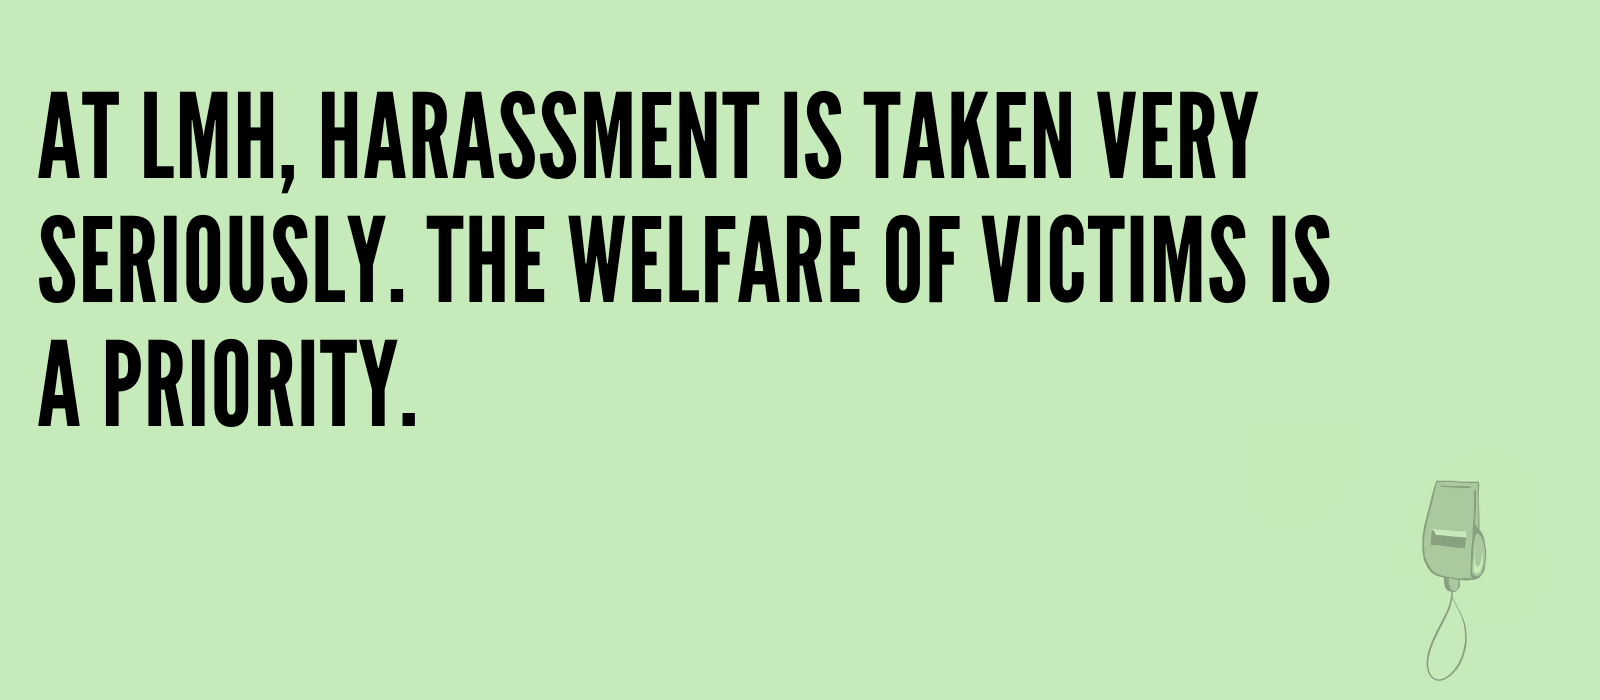 Poster reads: At LMH harassment is taken very seriously, the welfare of victims is a priority